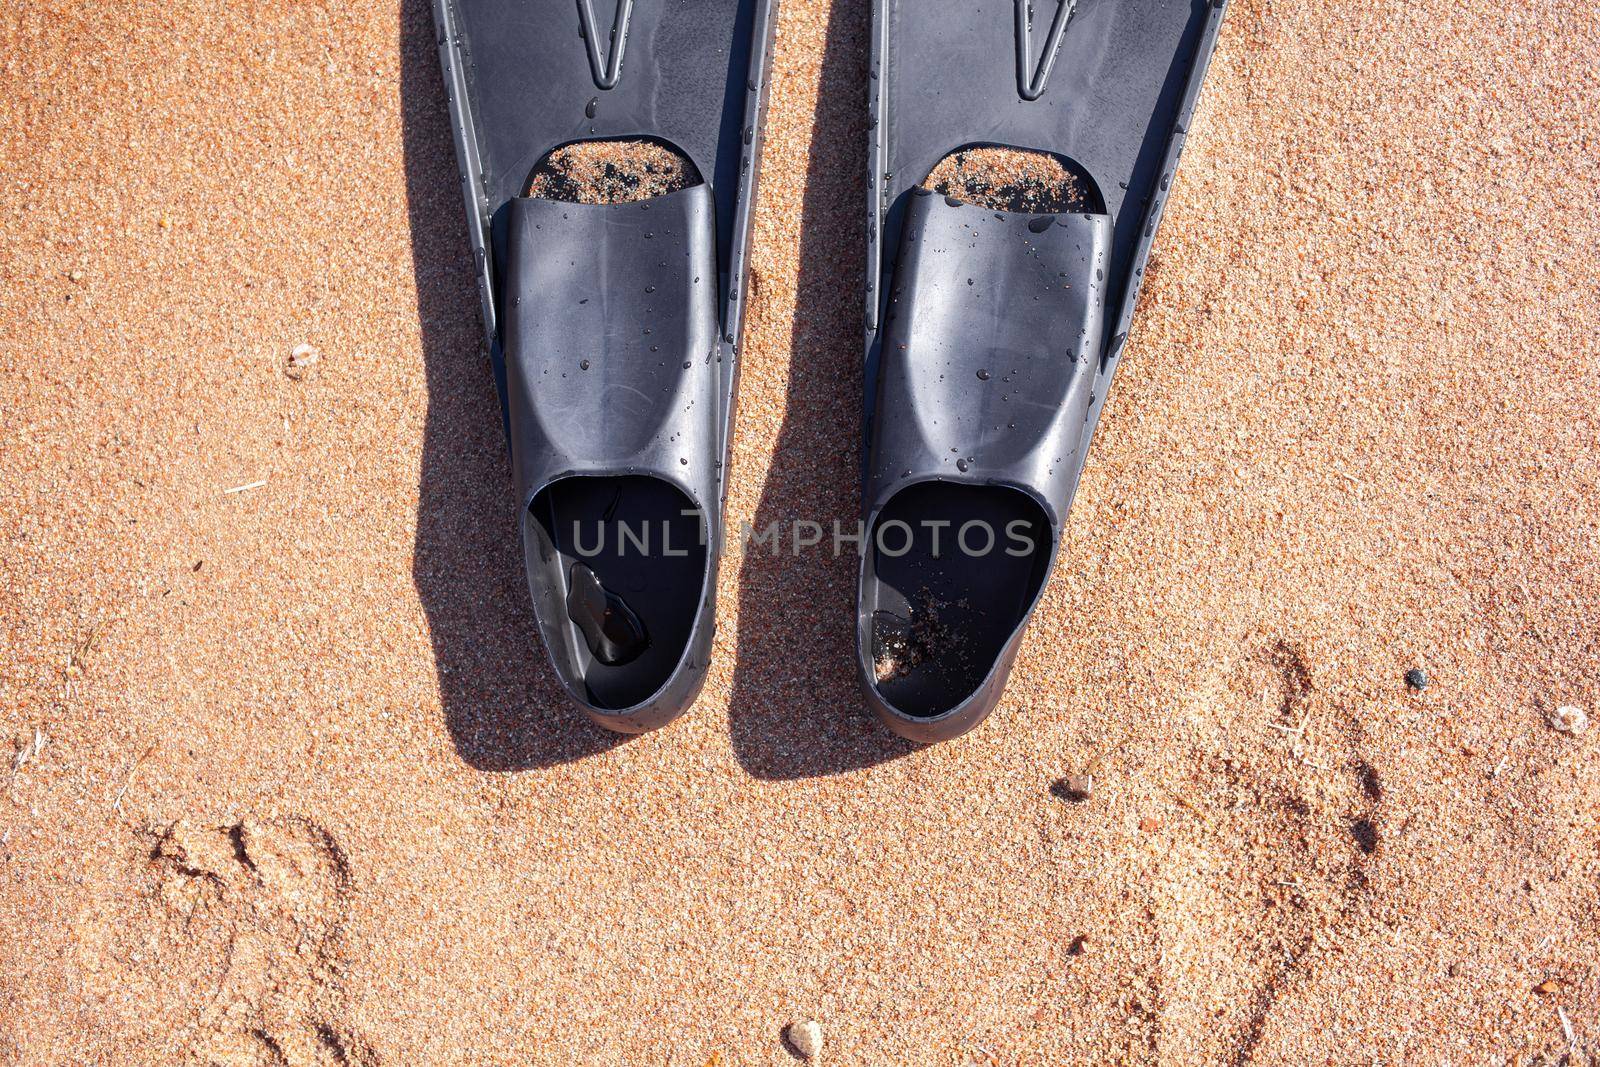 A pair of black flippers on the background of sand next to the water, top view. Swimming equipment - fins on the shore. Summer holidays, fun, exploring the sea world concept. Space for copy.